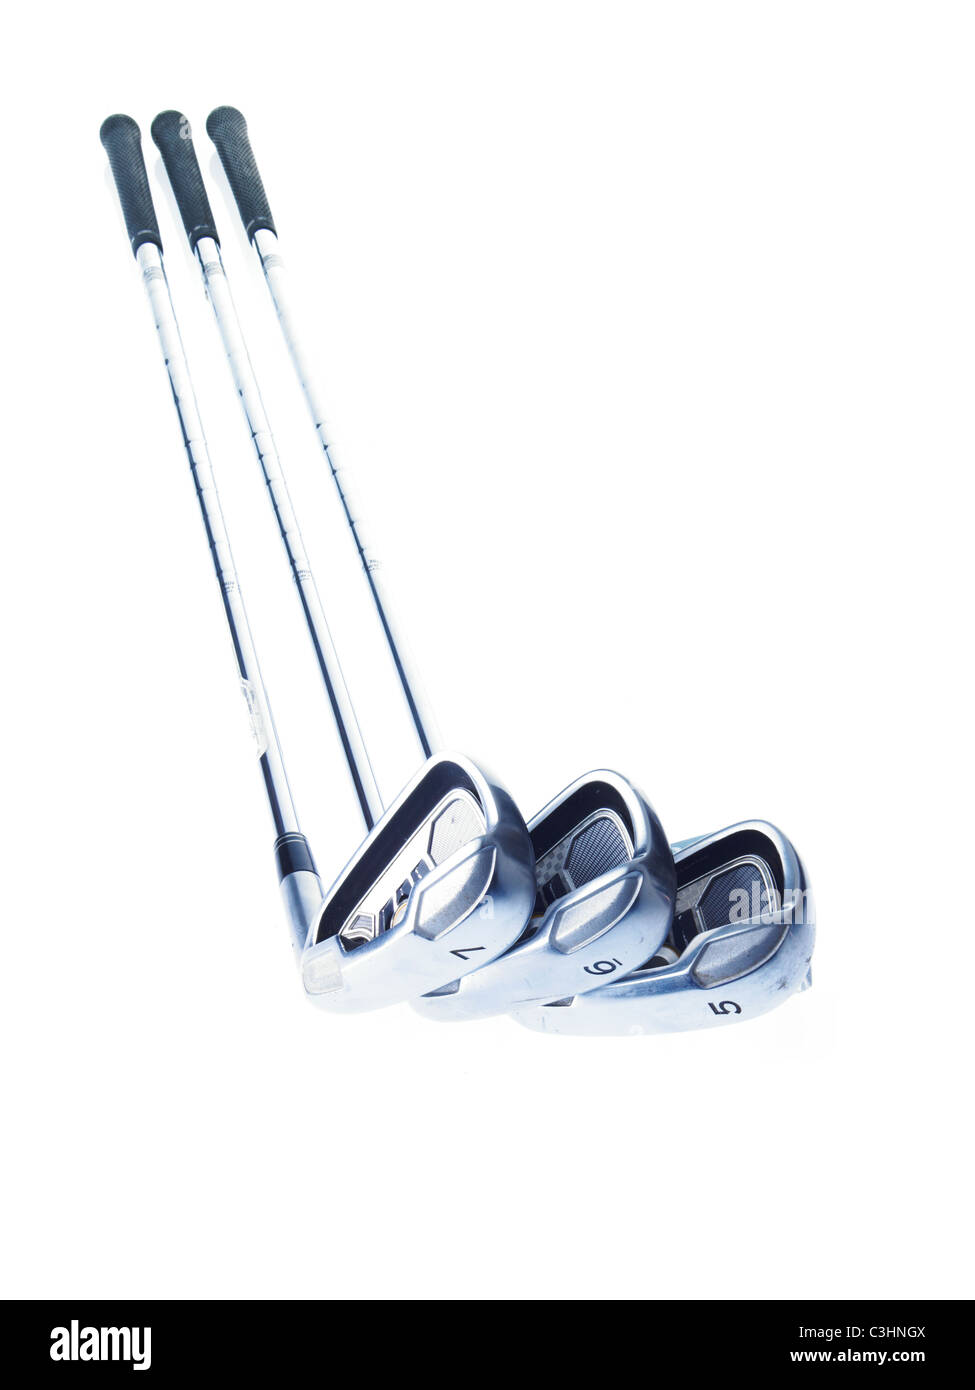 Set of Golf clubs on white background, including irons, metal woods and a  putter in a golf bag Stock Photo - Alamy